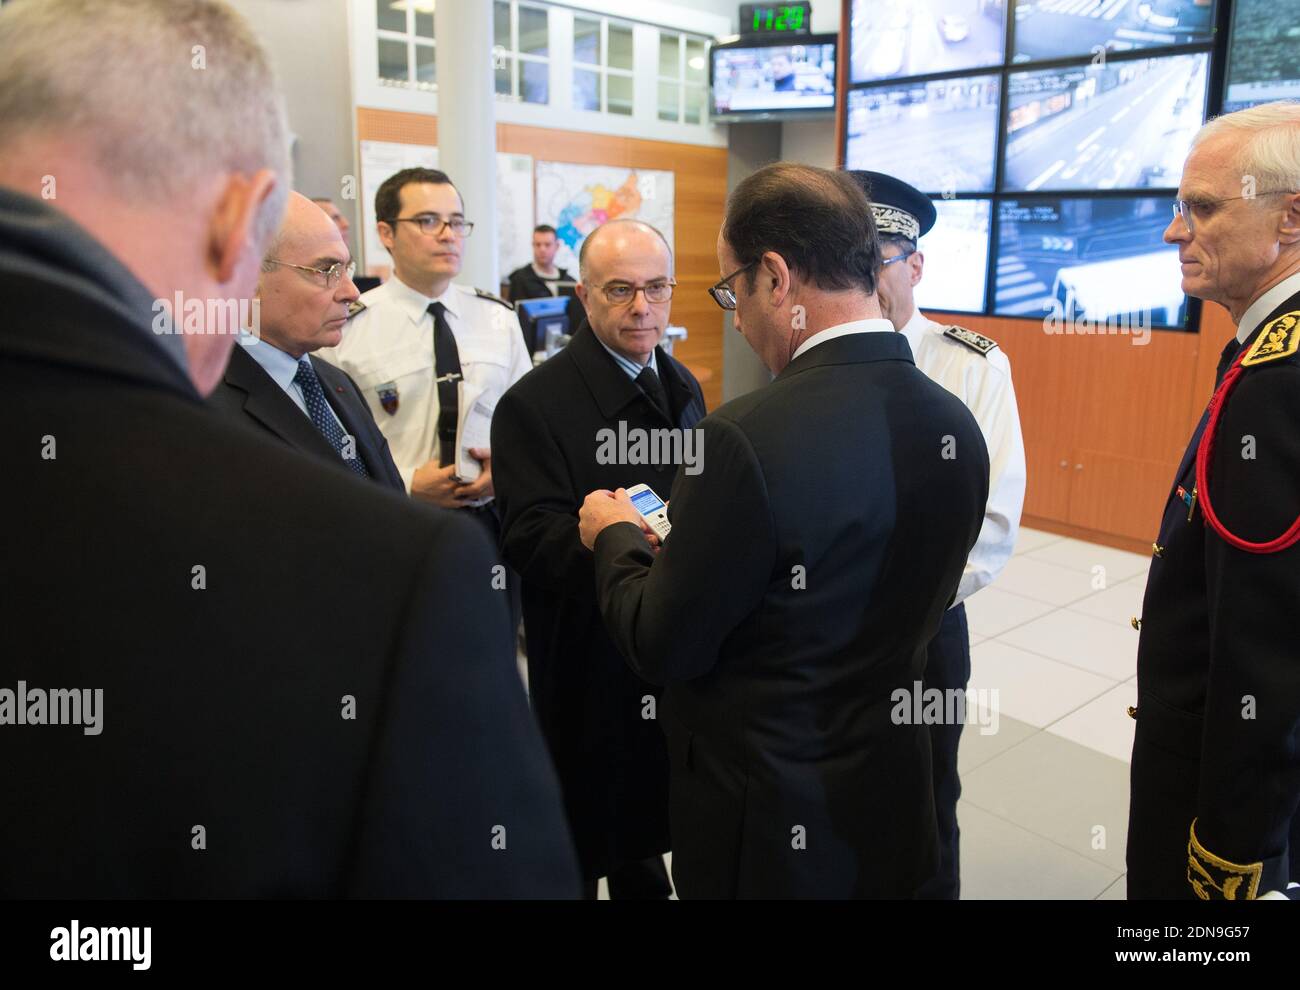 French President Francois Hollande reads a message on Interior Minister Bernard Cazeneuve's cell phone as Hollande's Cabinet Director Thierry Lataste and Paris Police Prefect Bernard Boucault look on during a visit to the Prefecture de Police following yesterday's deadly terror attack at satirical weekly Charlie Hebdo, in Paris, France on January 8, 2015. Photo Pool by Jacques Witt/ABACAPRESS.COM Stock Photo